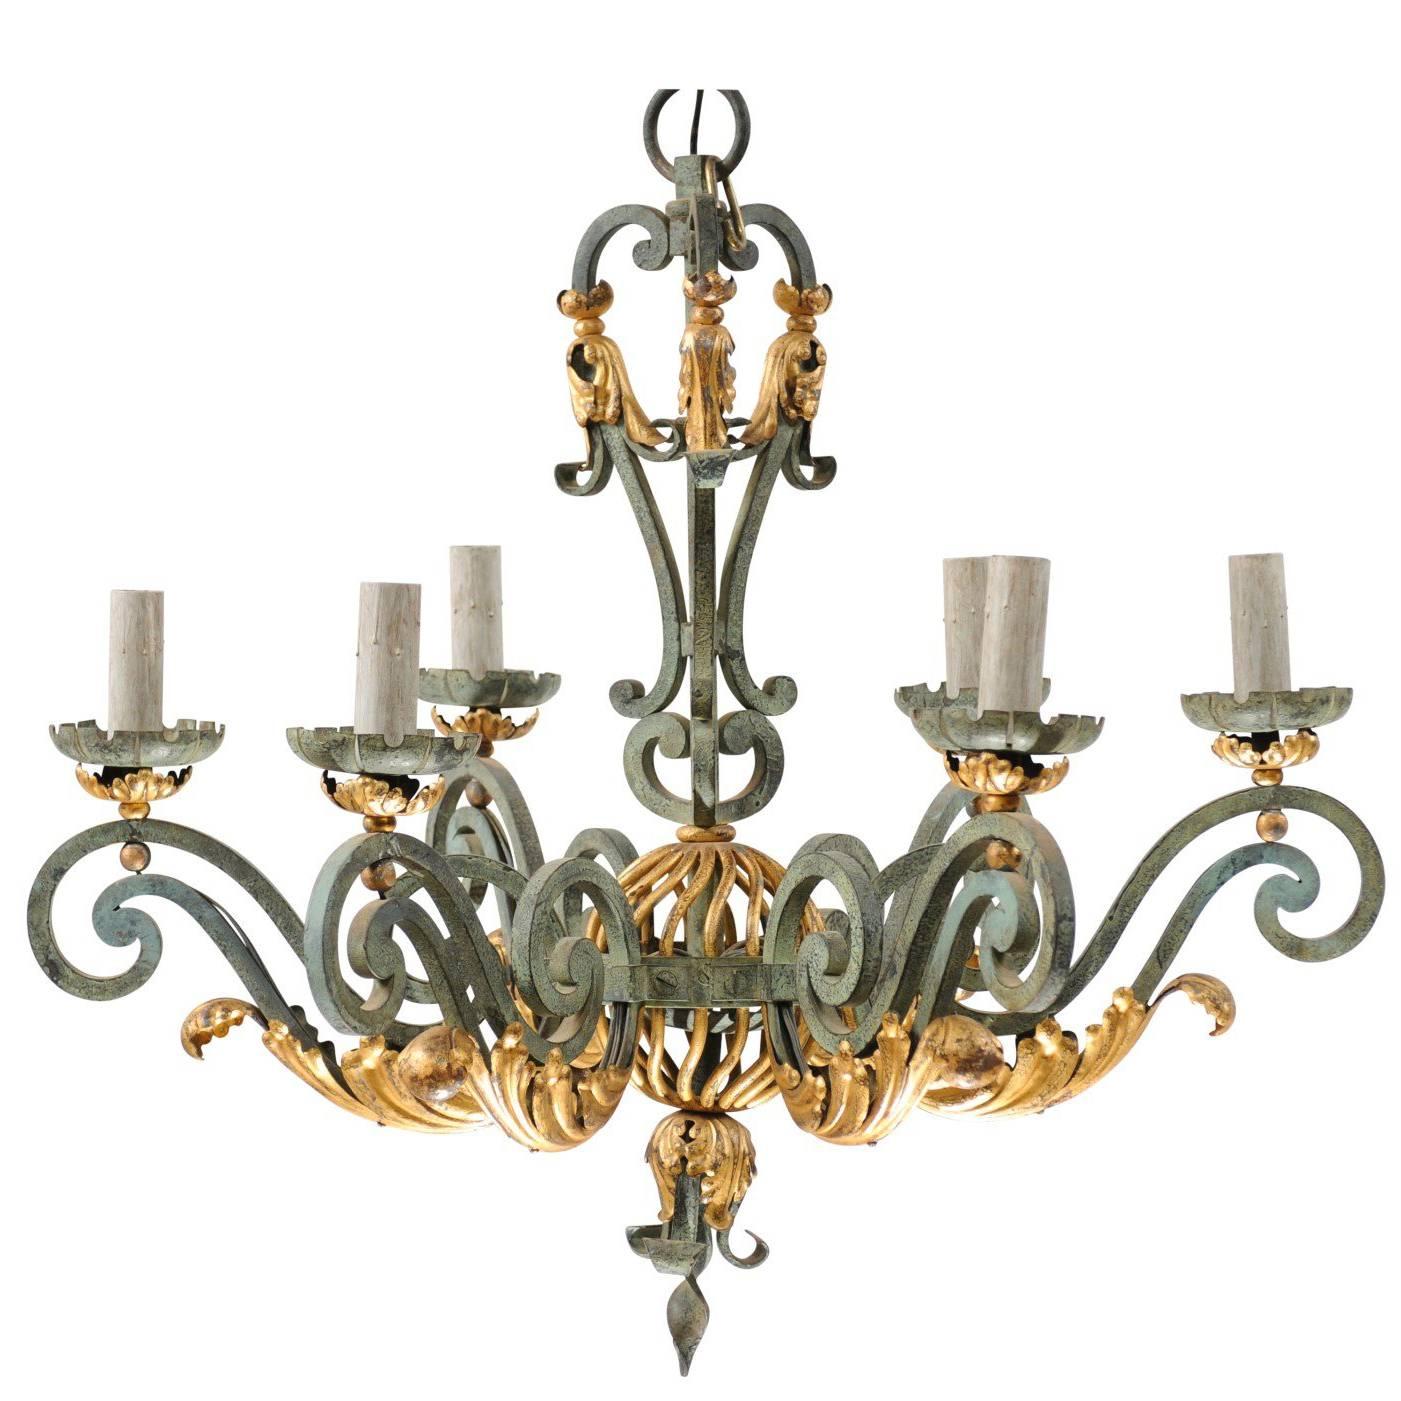 Elegant French Verdigris Six-Light Chandelier of Forged Iron with Gilt Accent For Sale